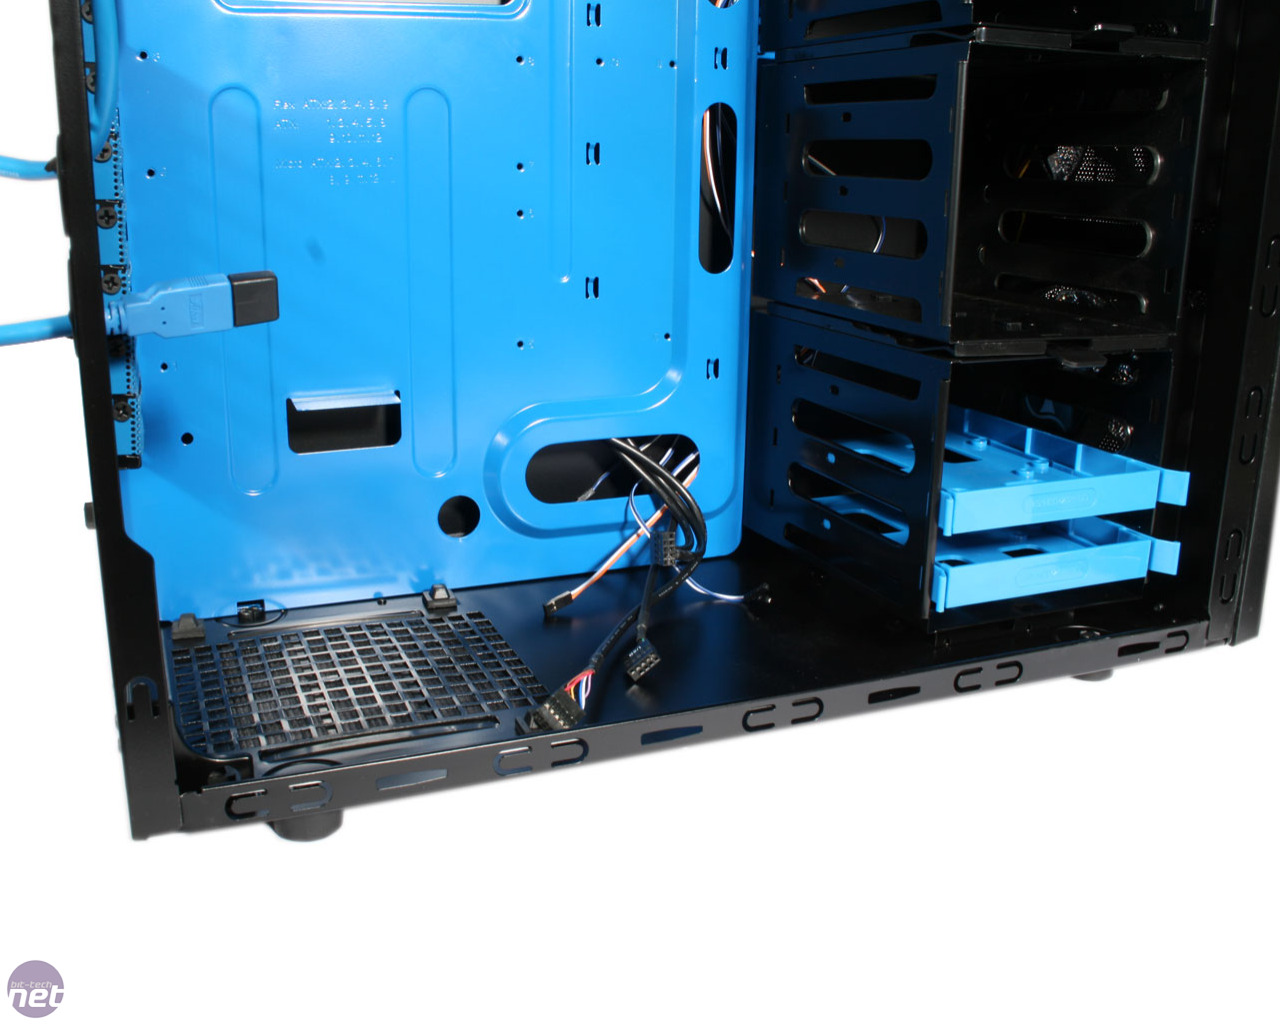 Sharkoon T28 blue edition [1010297] from WatercoolingUK